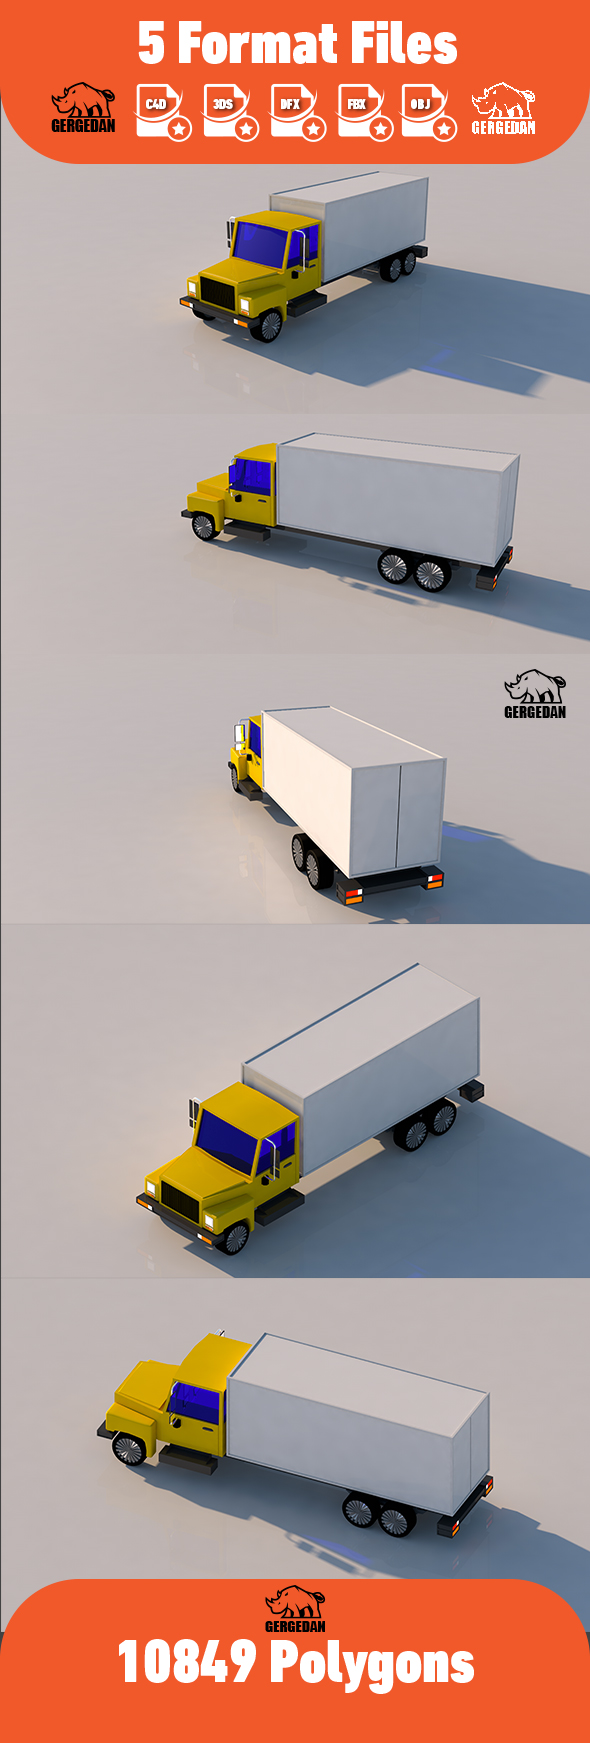 Low Poly Truck - 3Docean 23310497